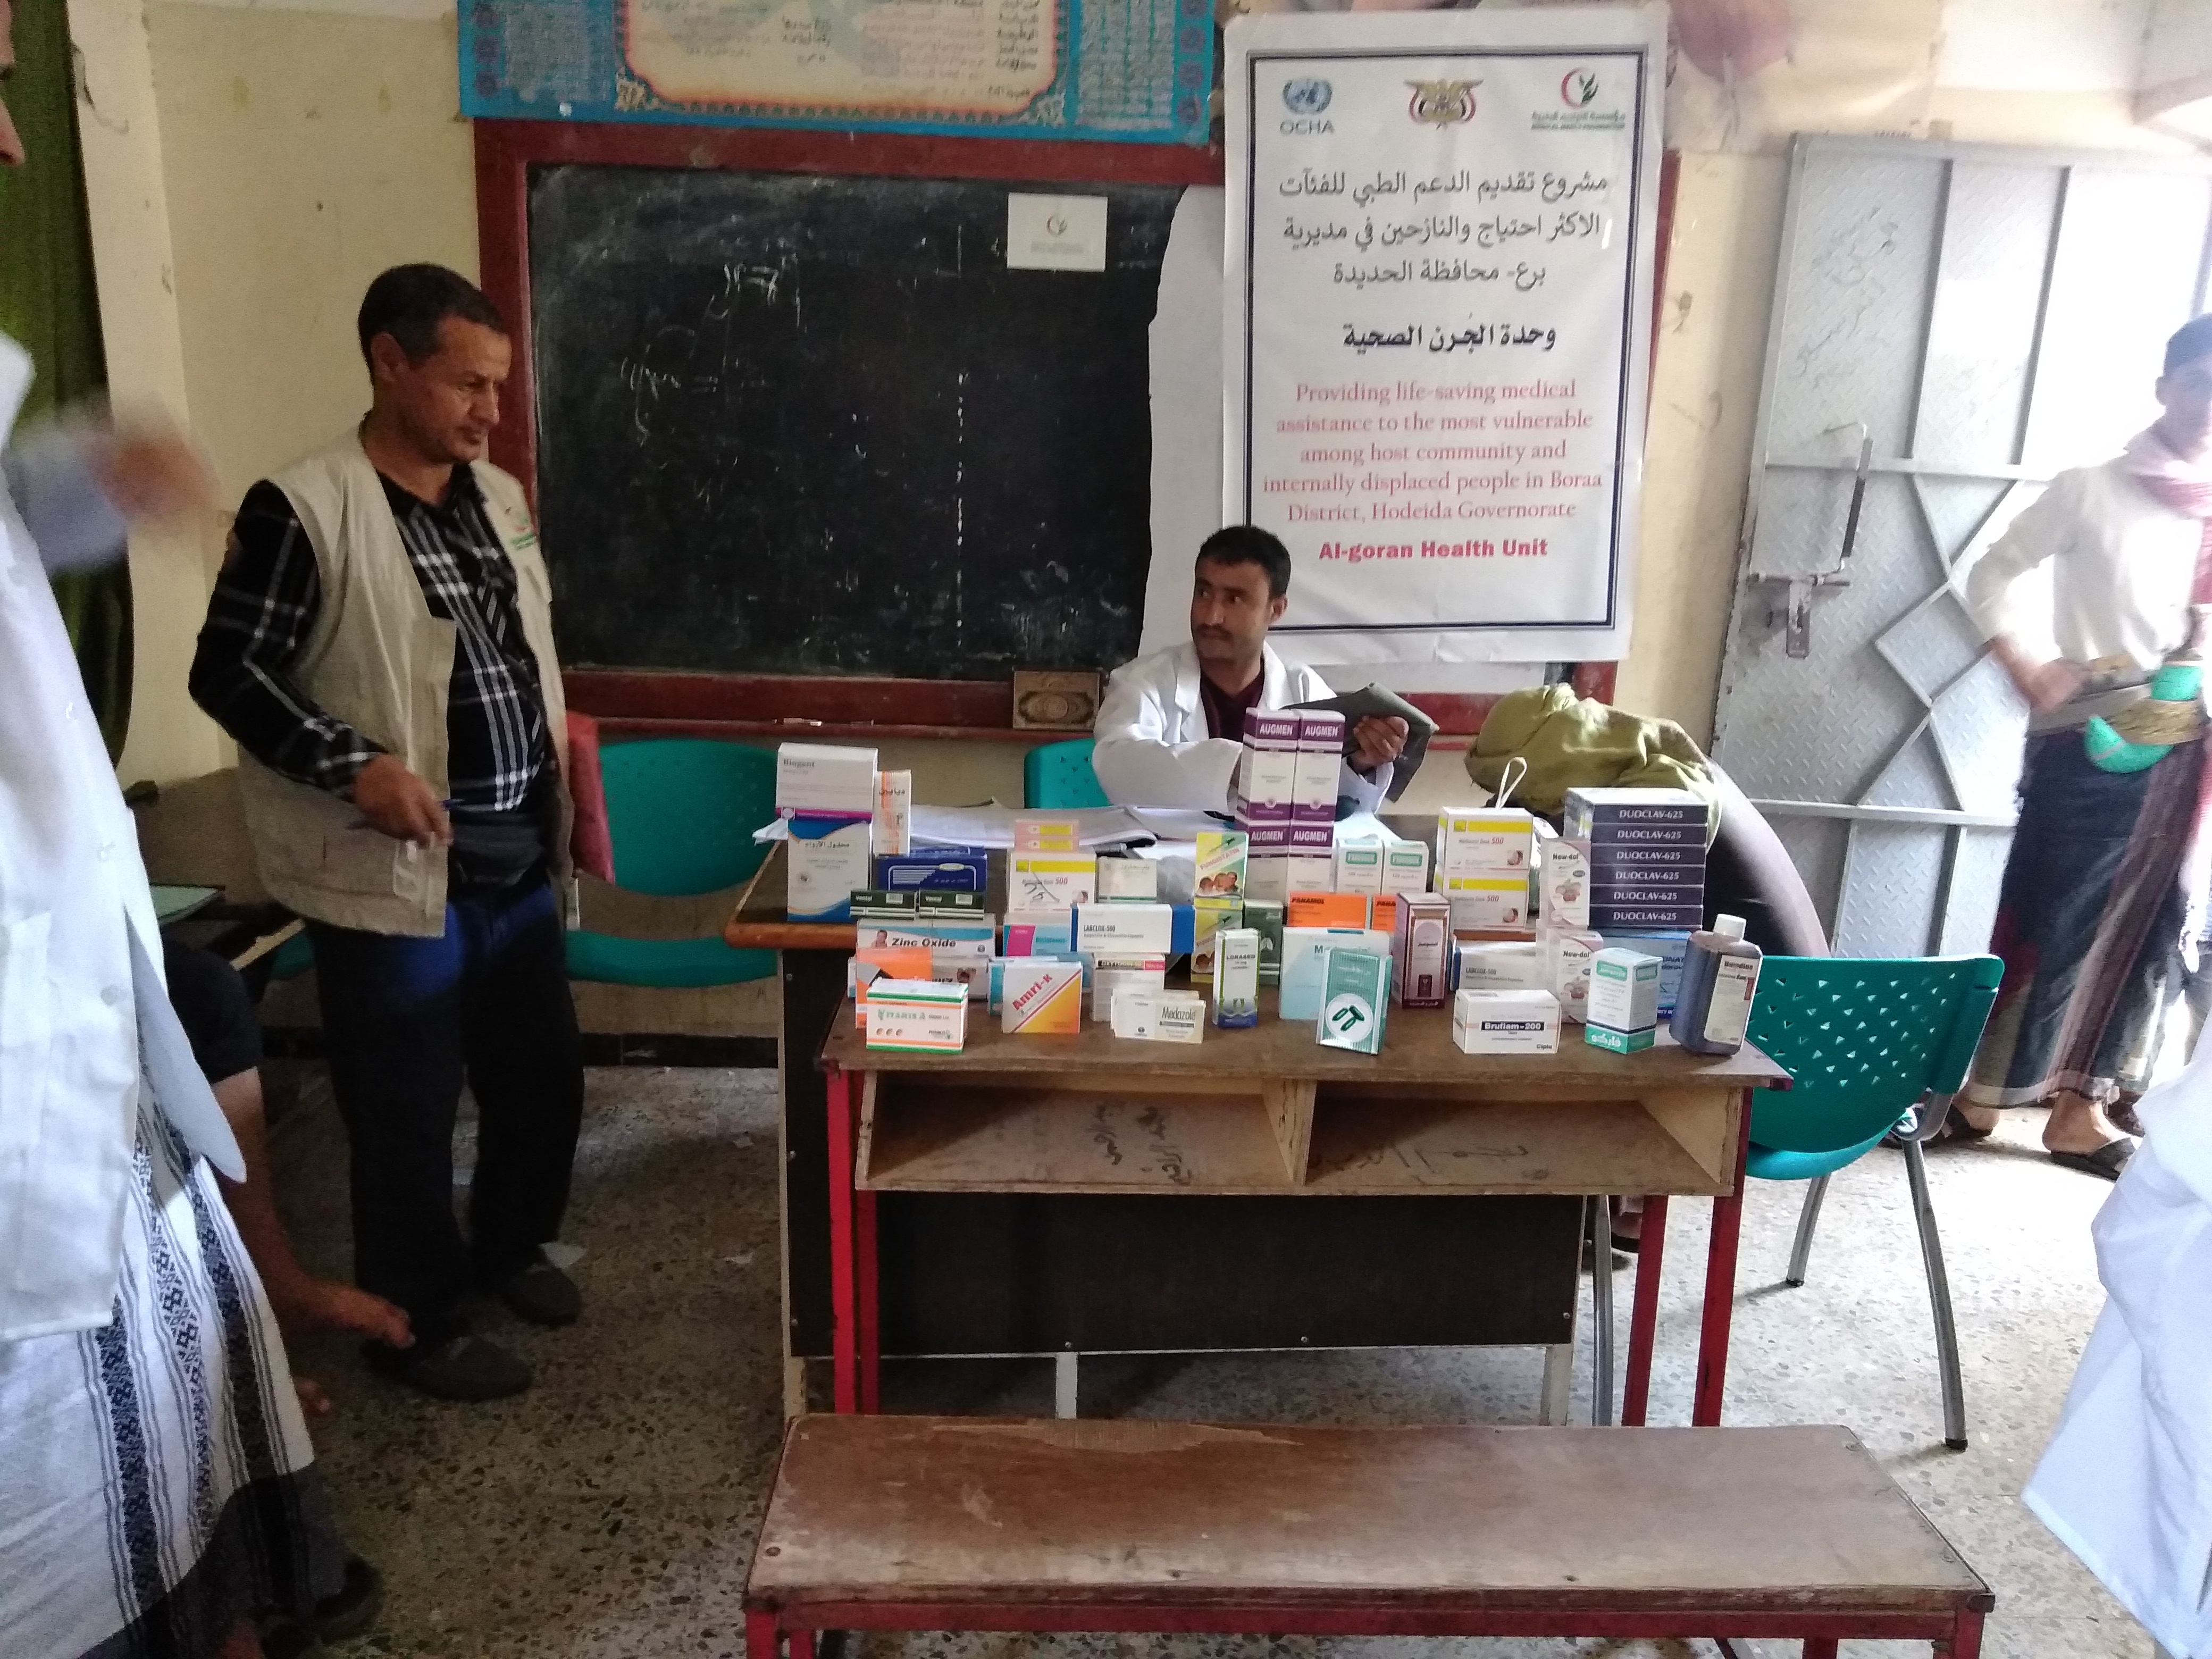 The Project of Providing Primary Health Services for Displaced persons and the most vulnerable Groups in Al  Hudaydah governorate, Buraa District